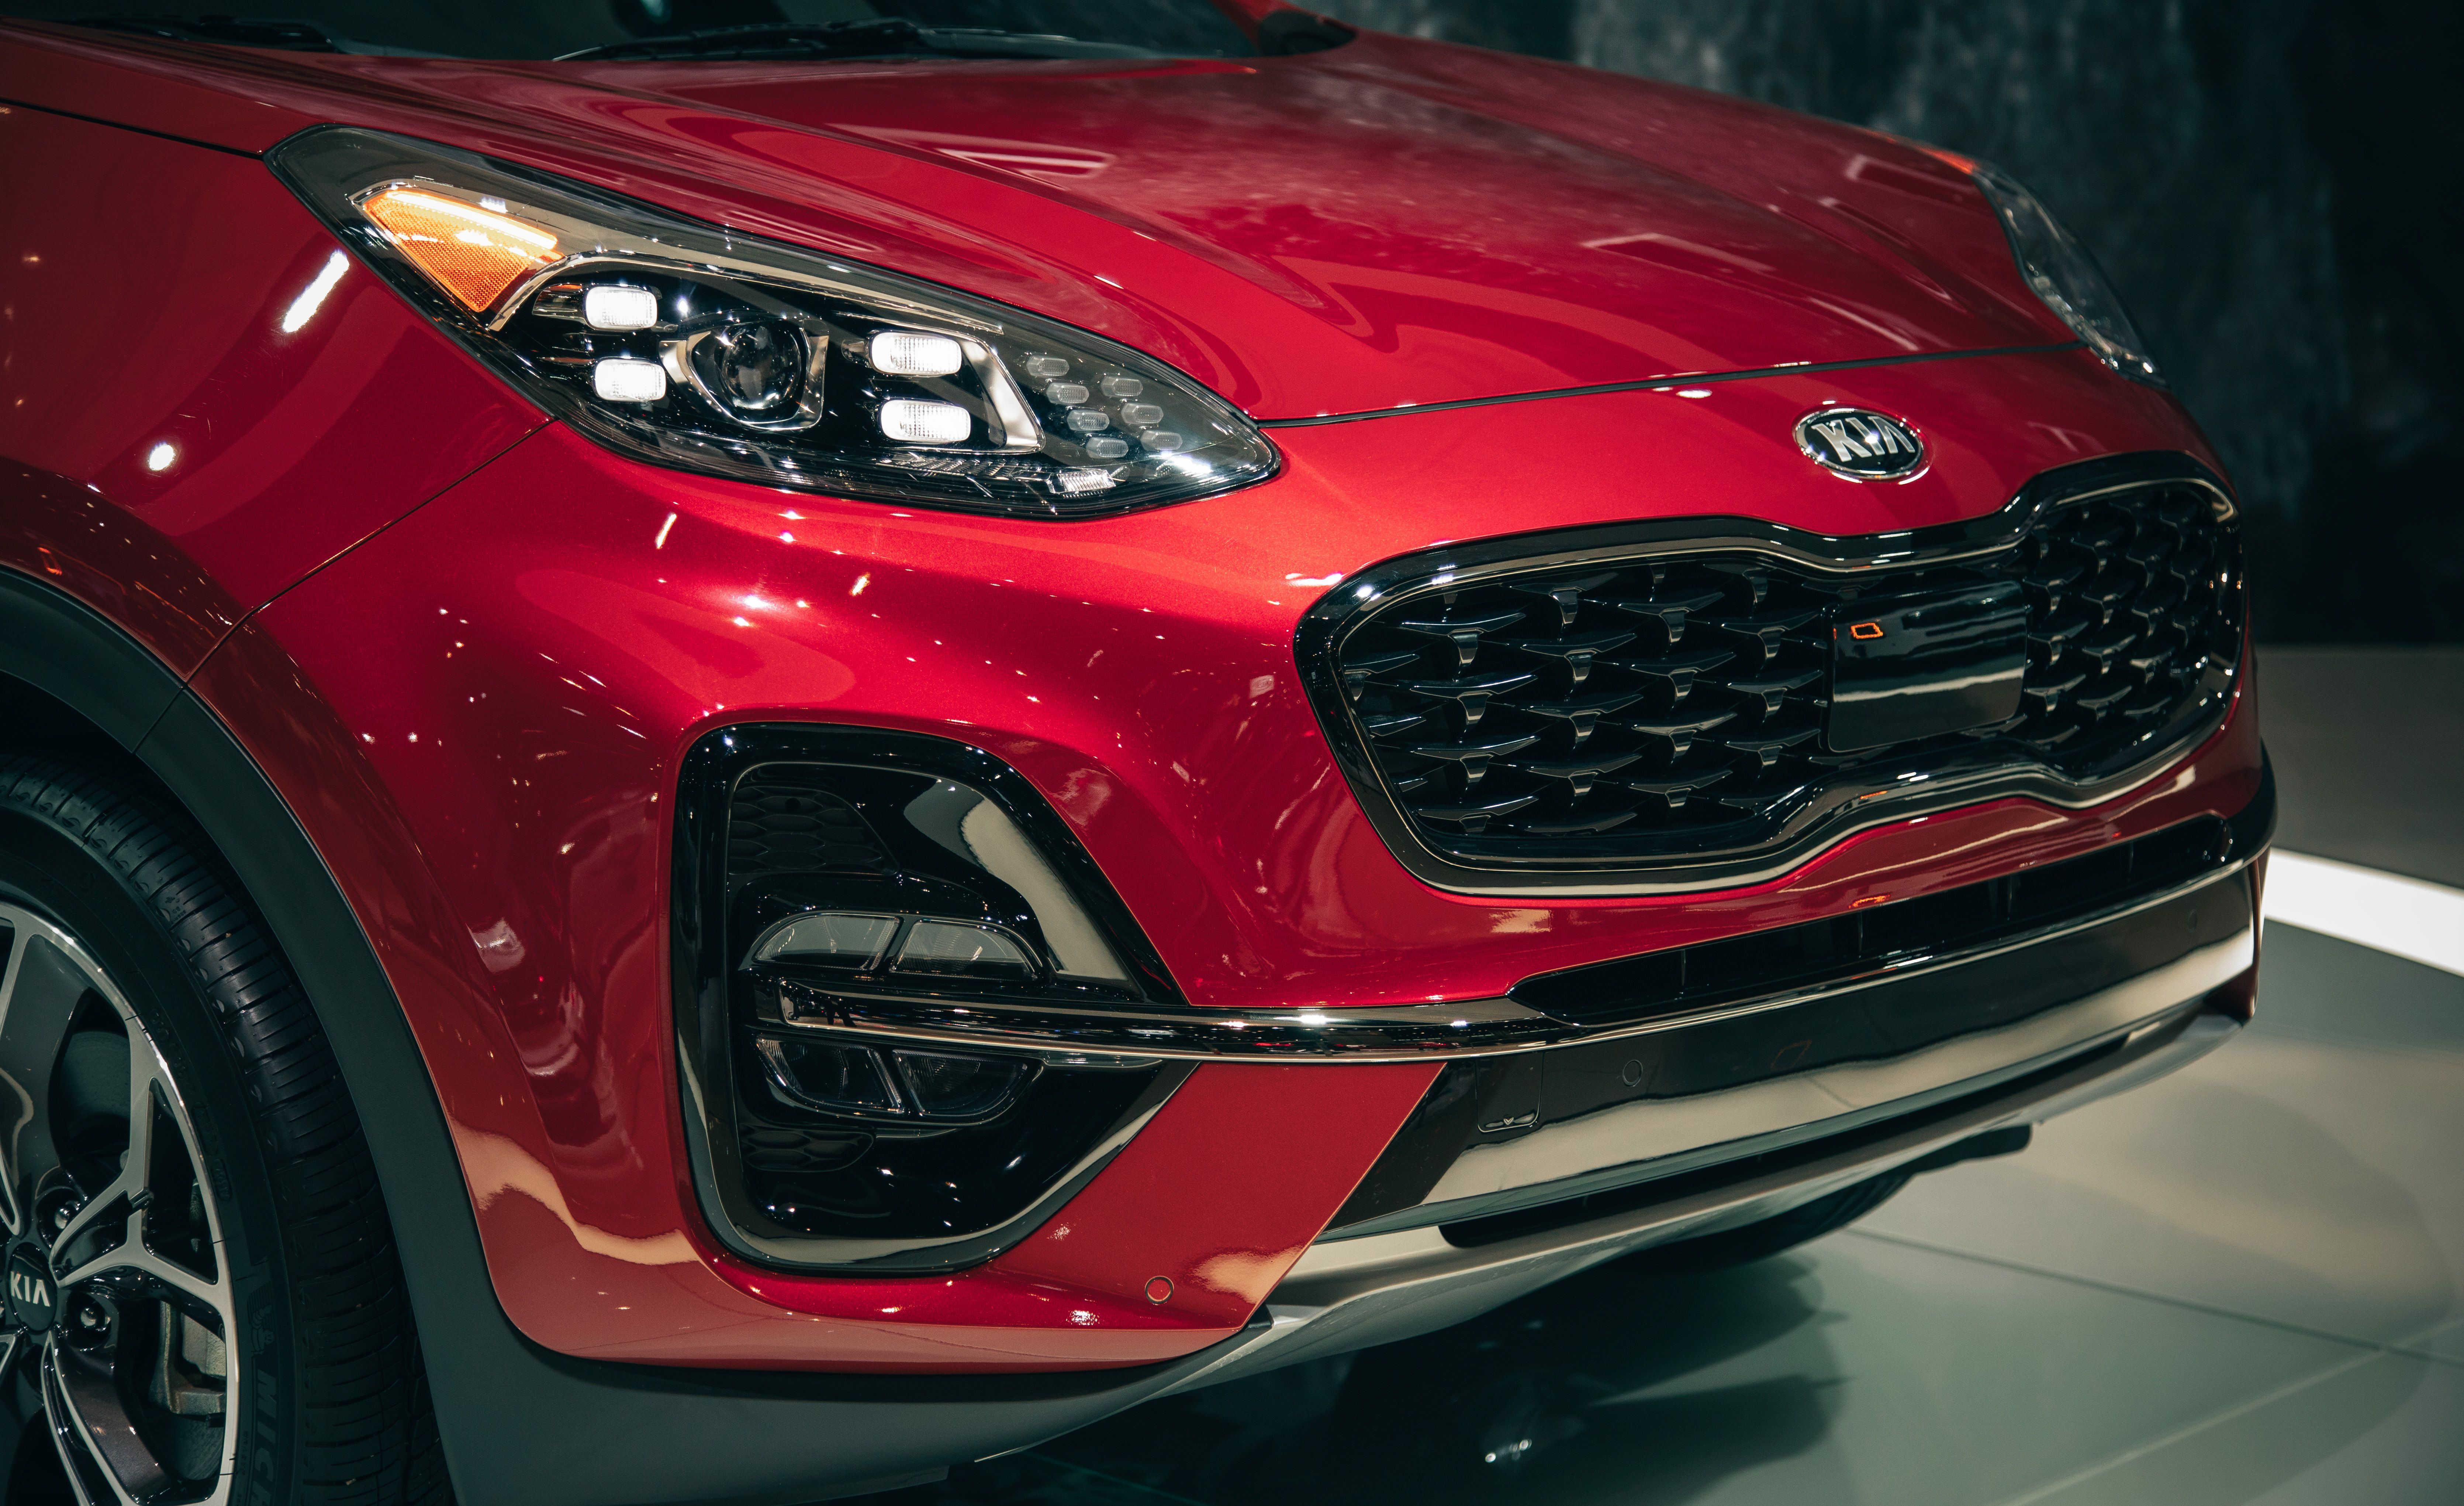 2020 Kia Sportage Looks a Little Cooler, Gets New Standard Features